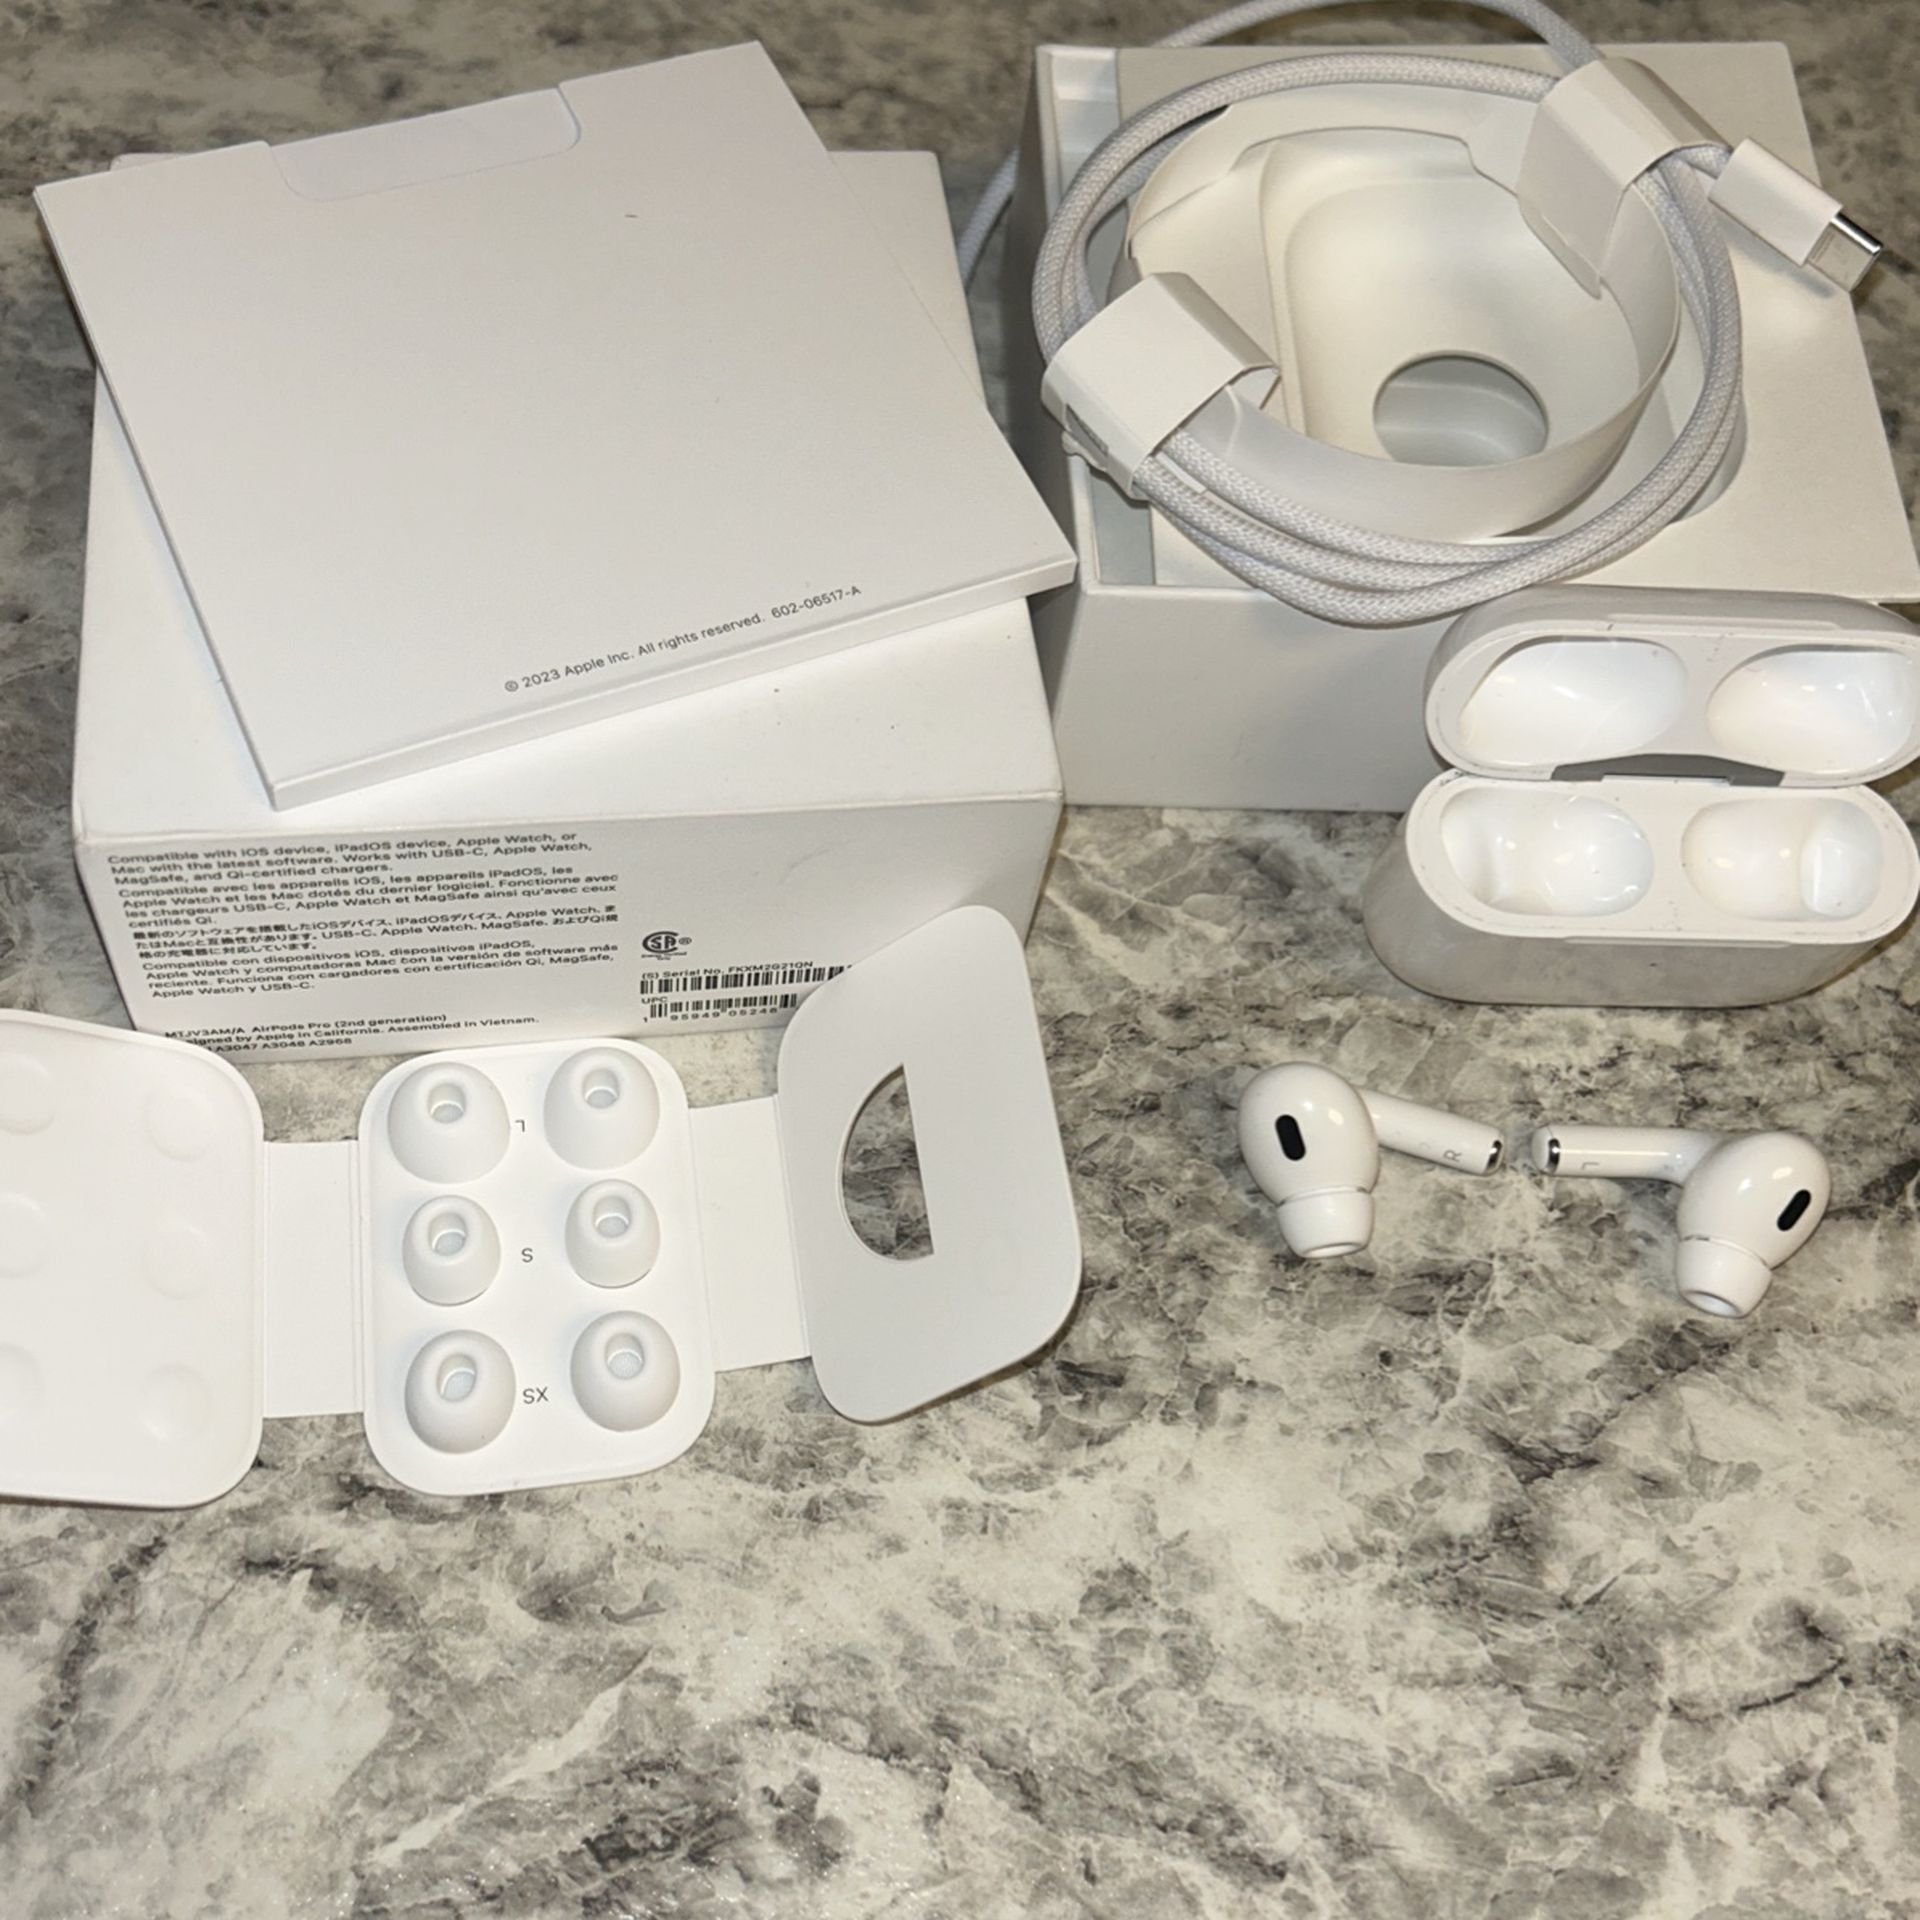 Used Apple AirPod pros 